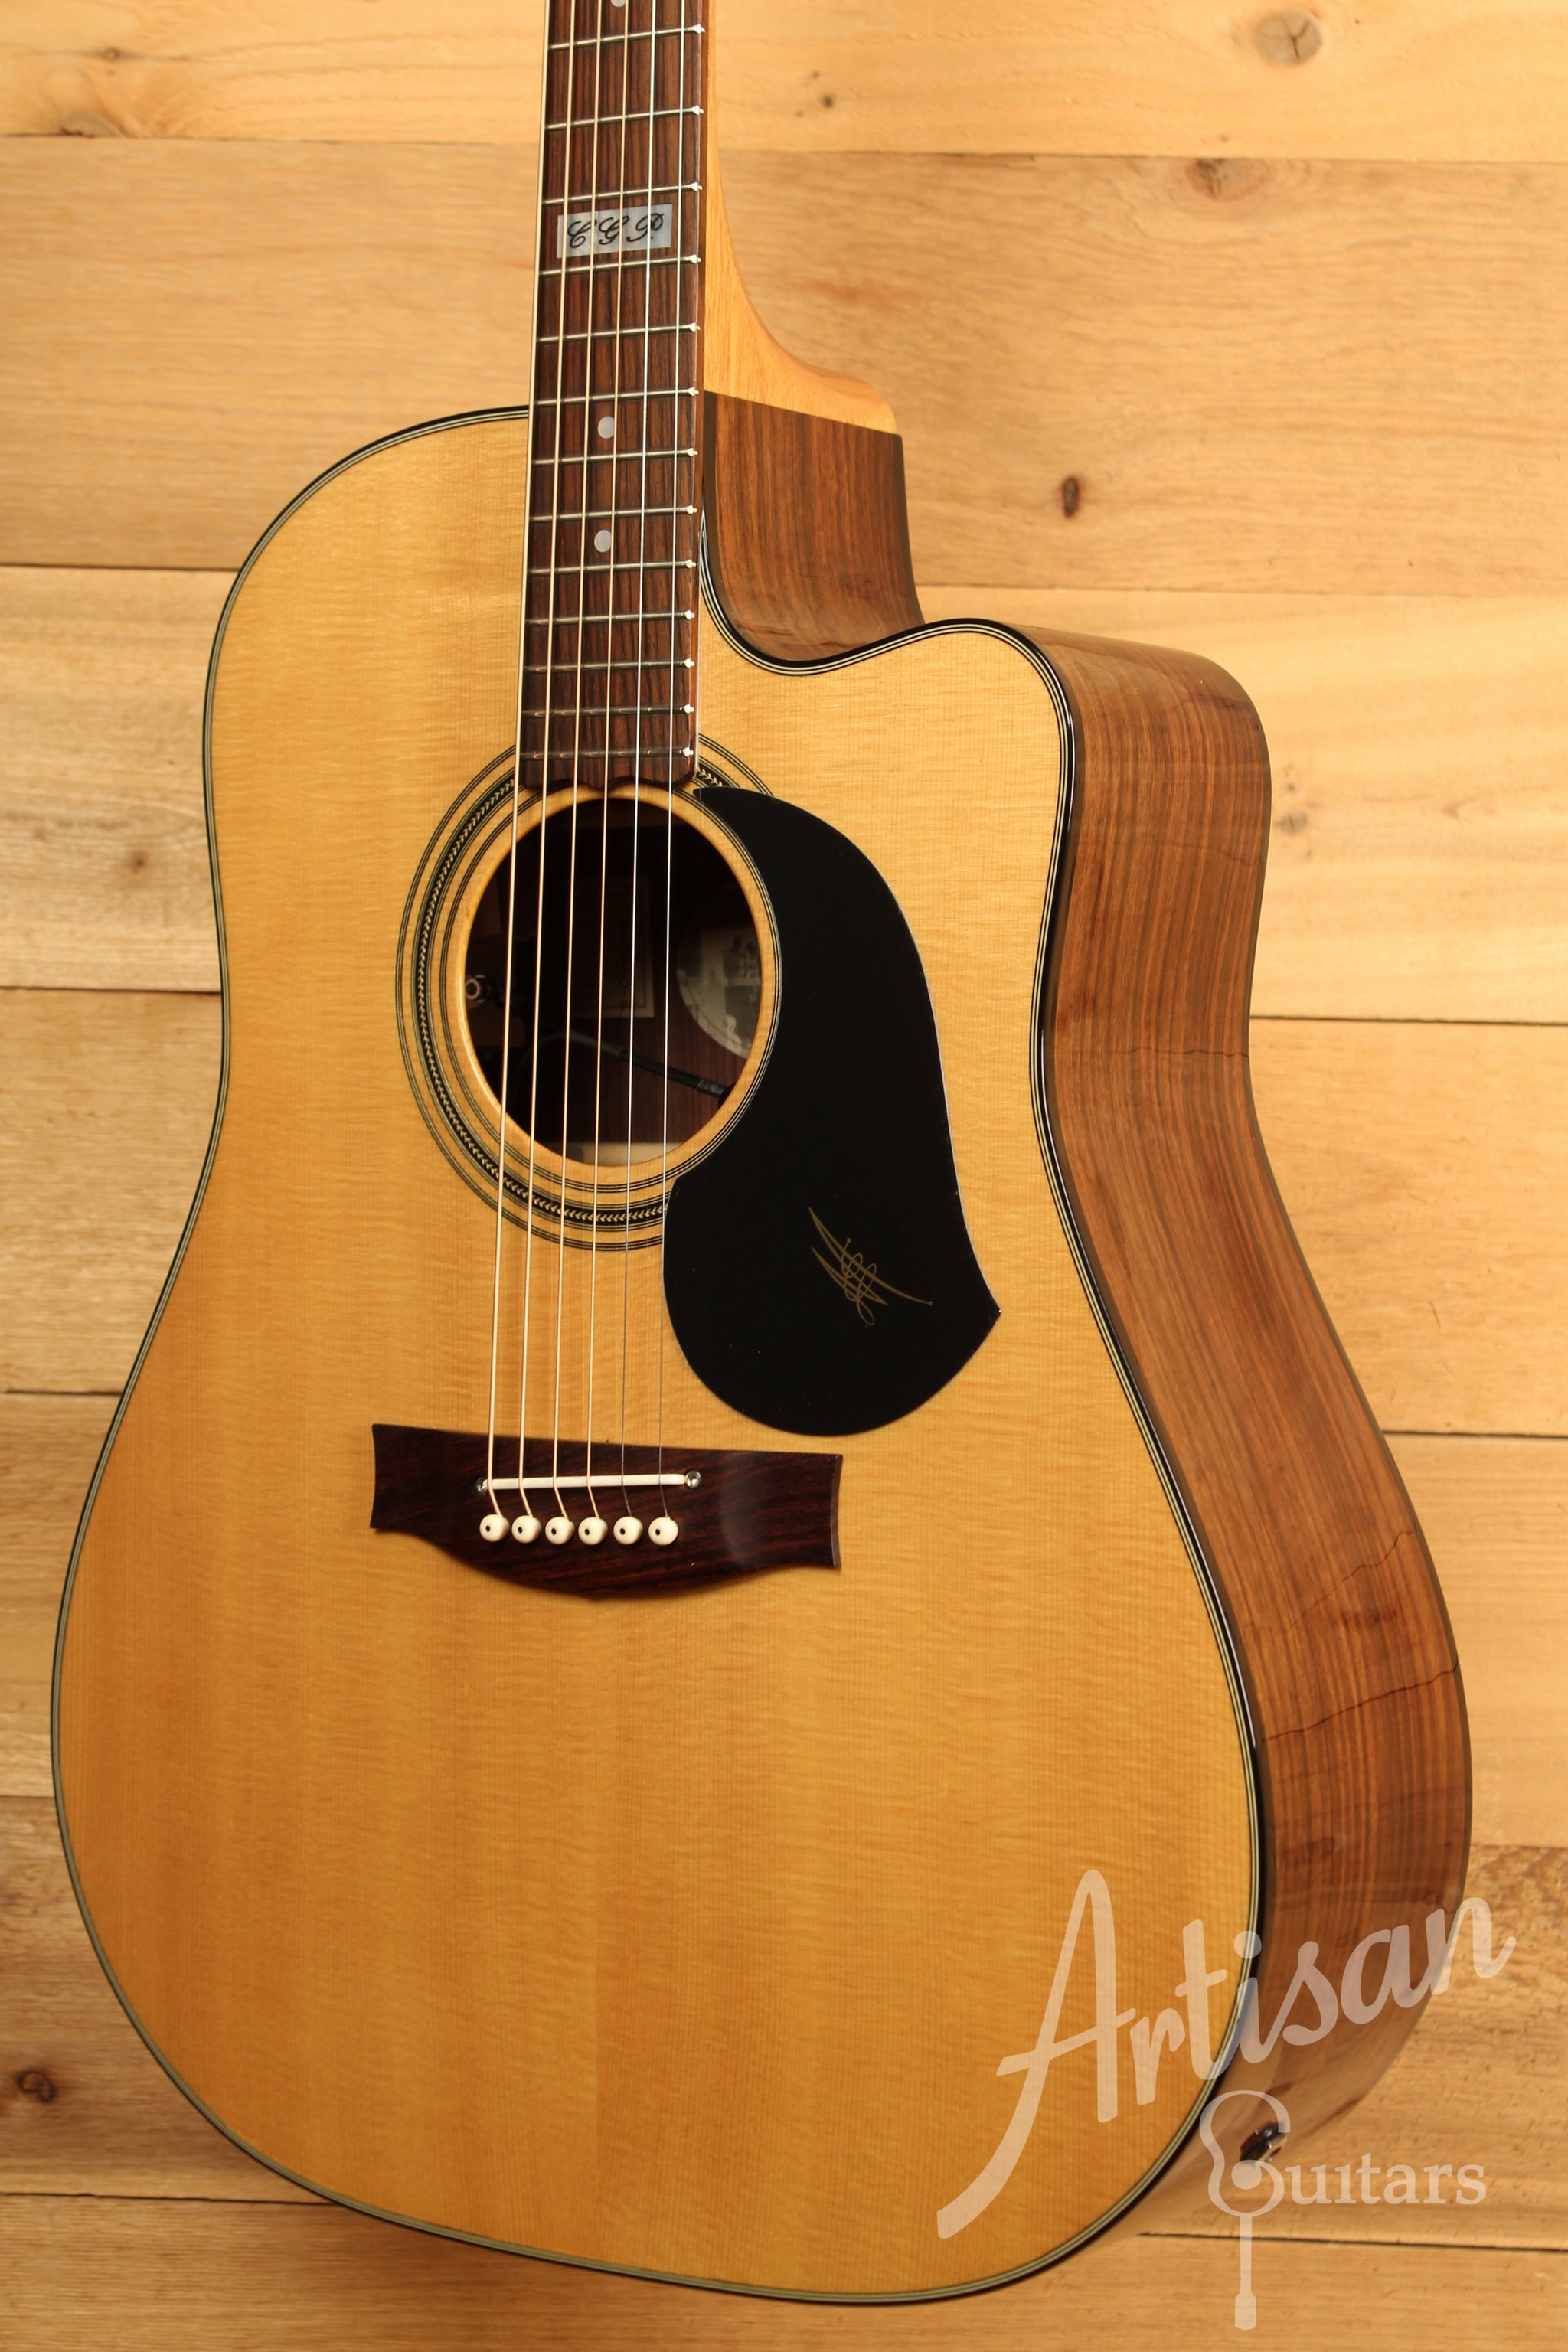 Maton TE 1 Guitar Tommy Emmanuel Artist Sitka Spruce and Indian Rosewood AP5 Pro Pre-Owned 2016 ID-11823 - Artisan Guitars